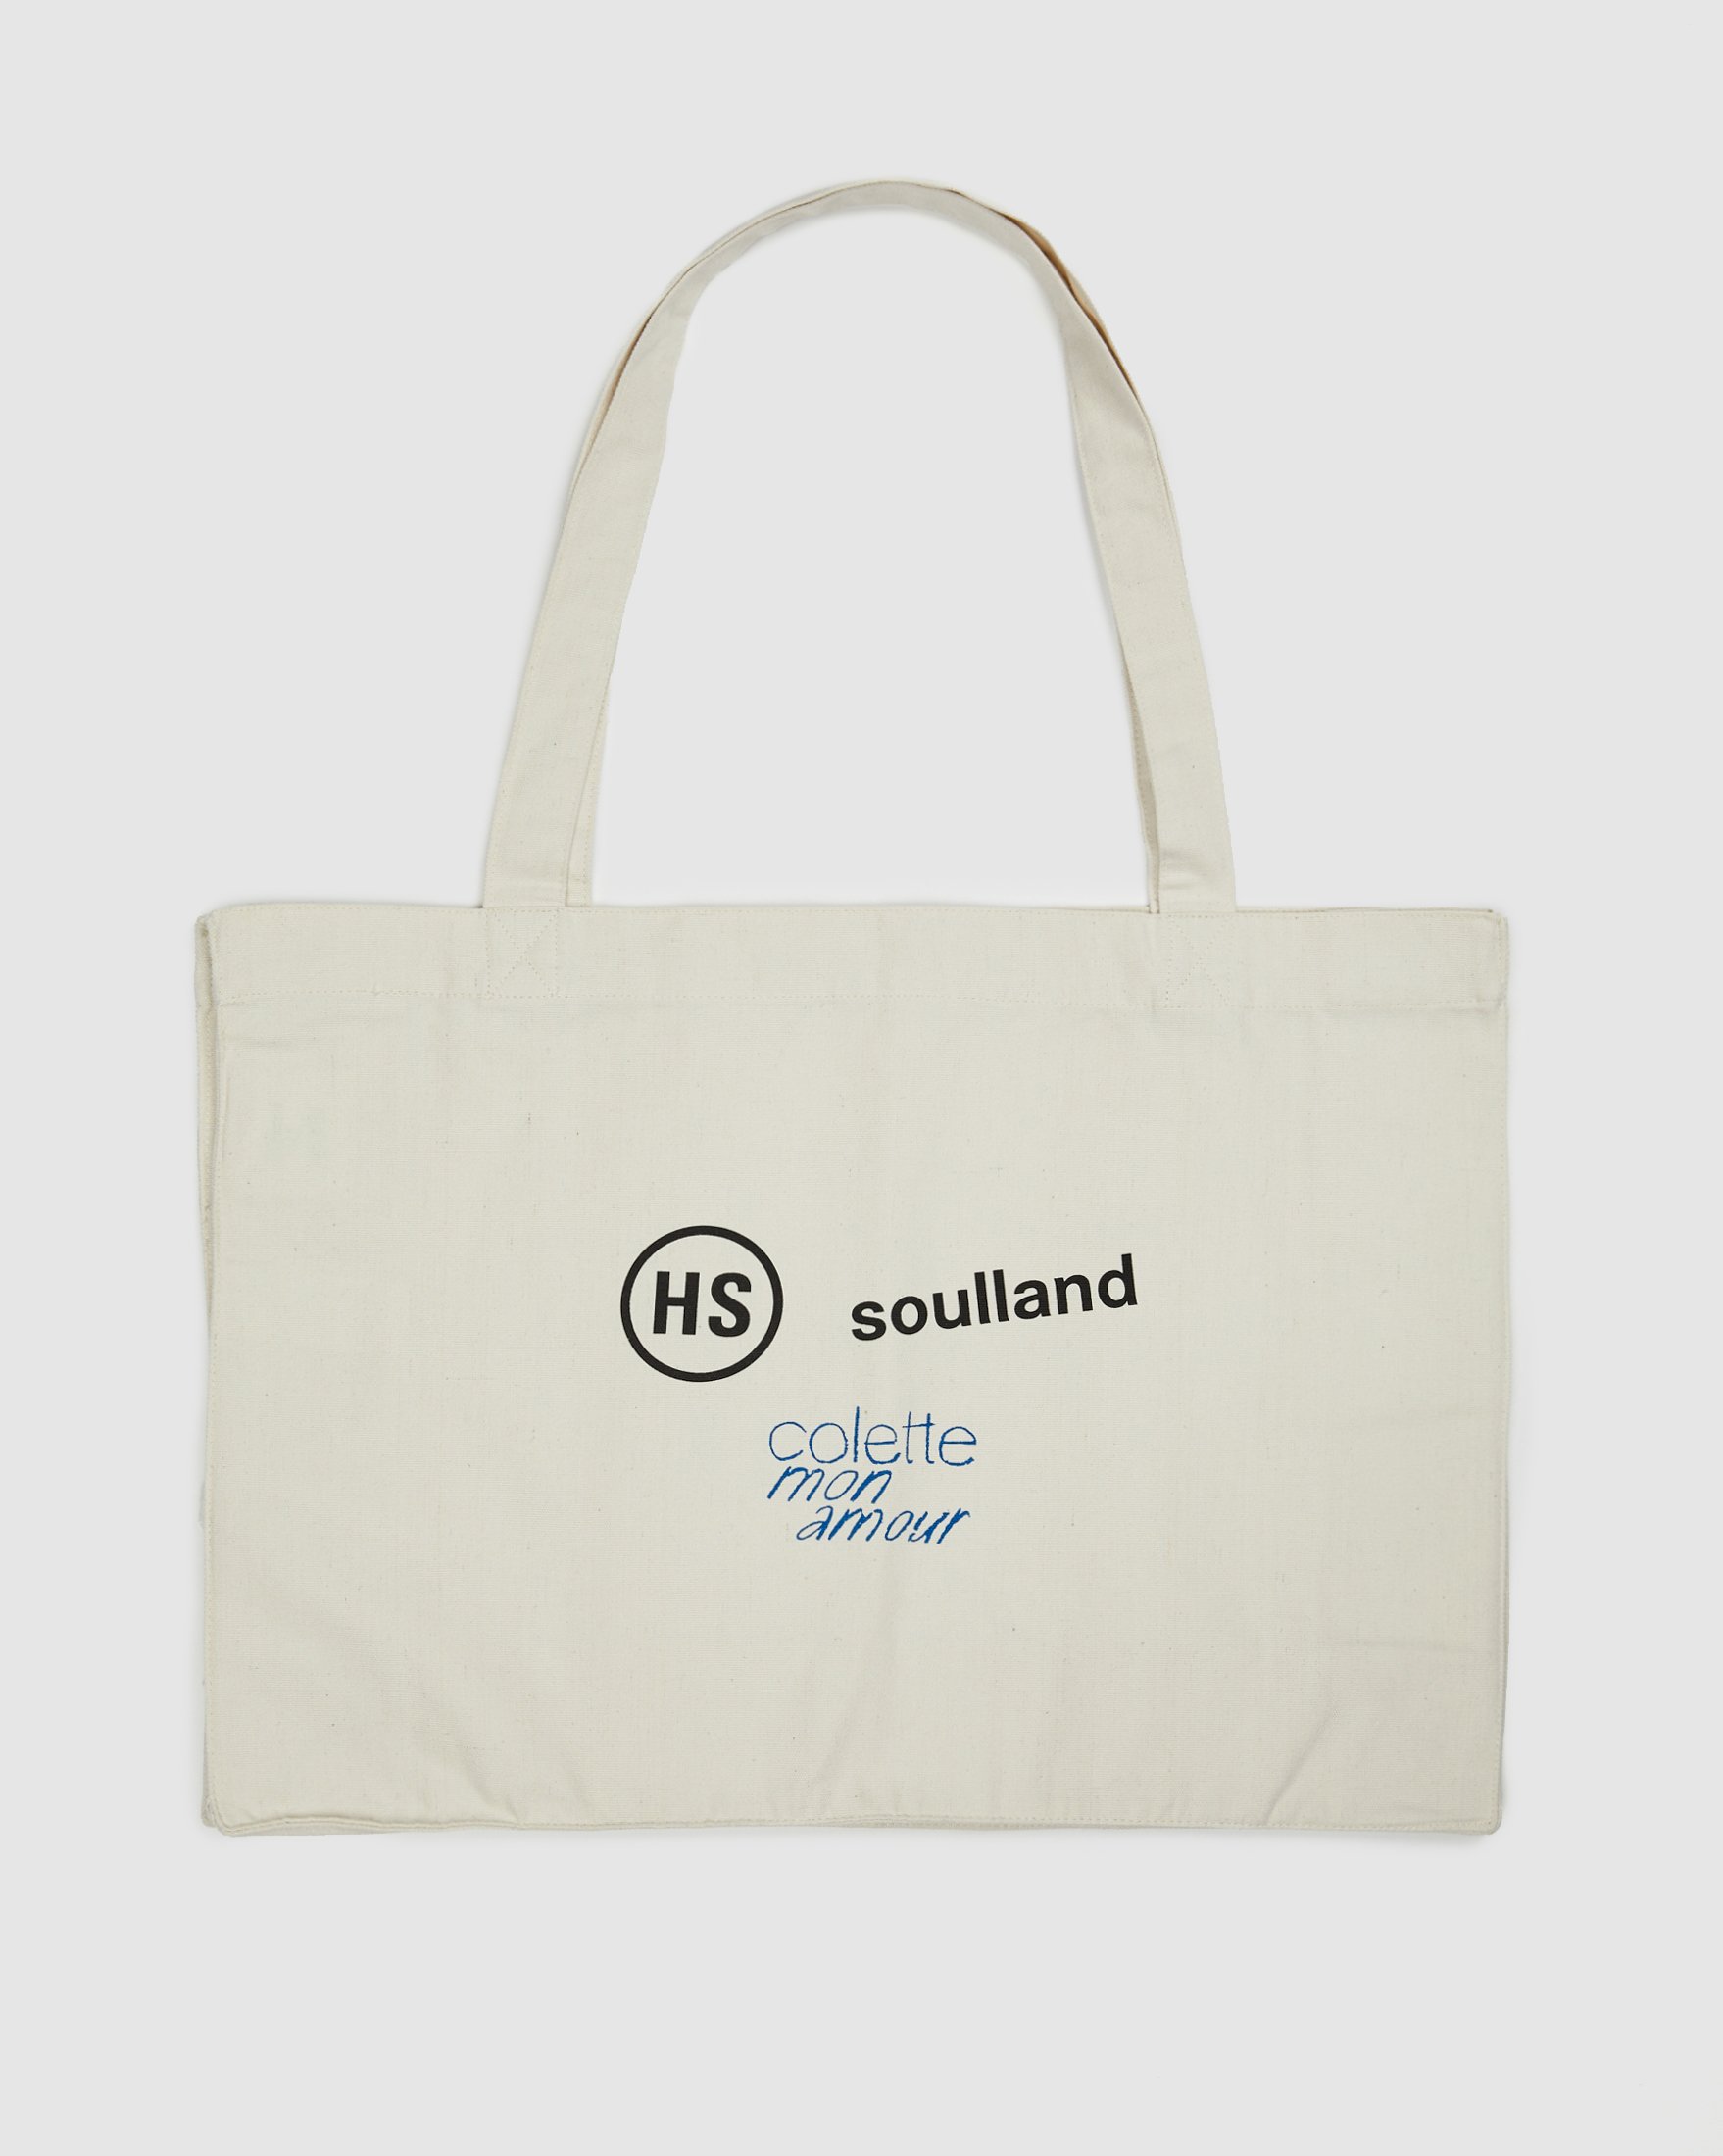 Colette Mon Amour x Soulland - Snoopy Comics White Totebag - Tote Bags - White - Image 2